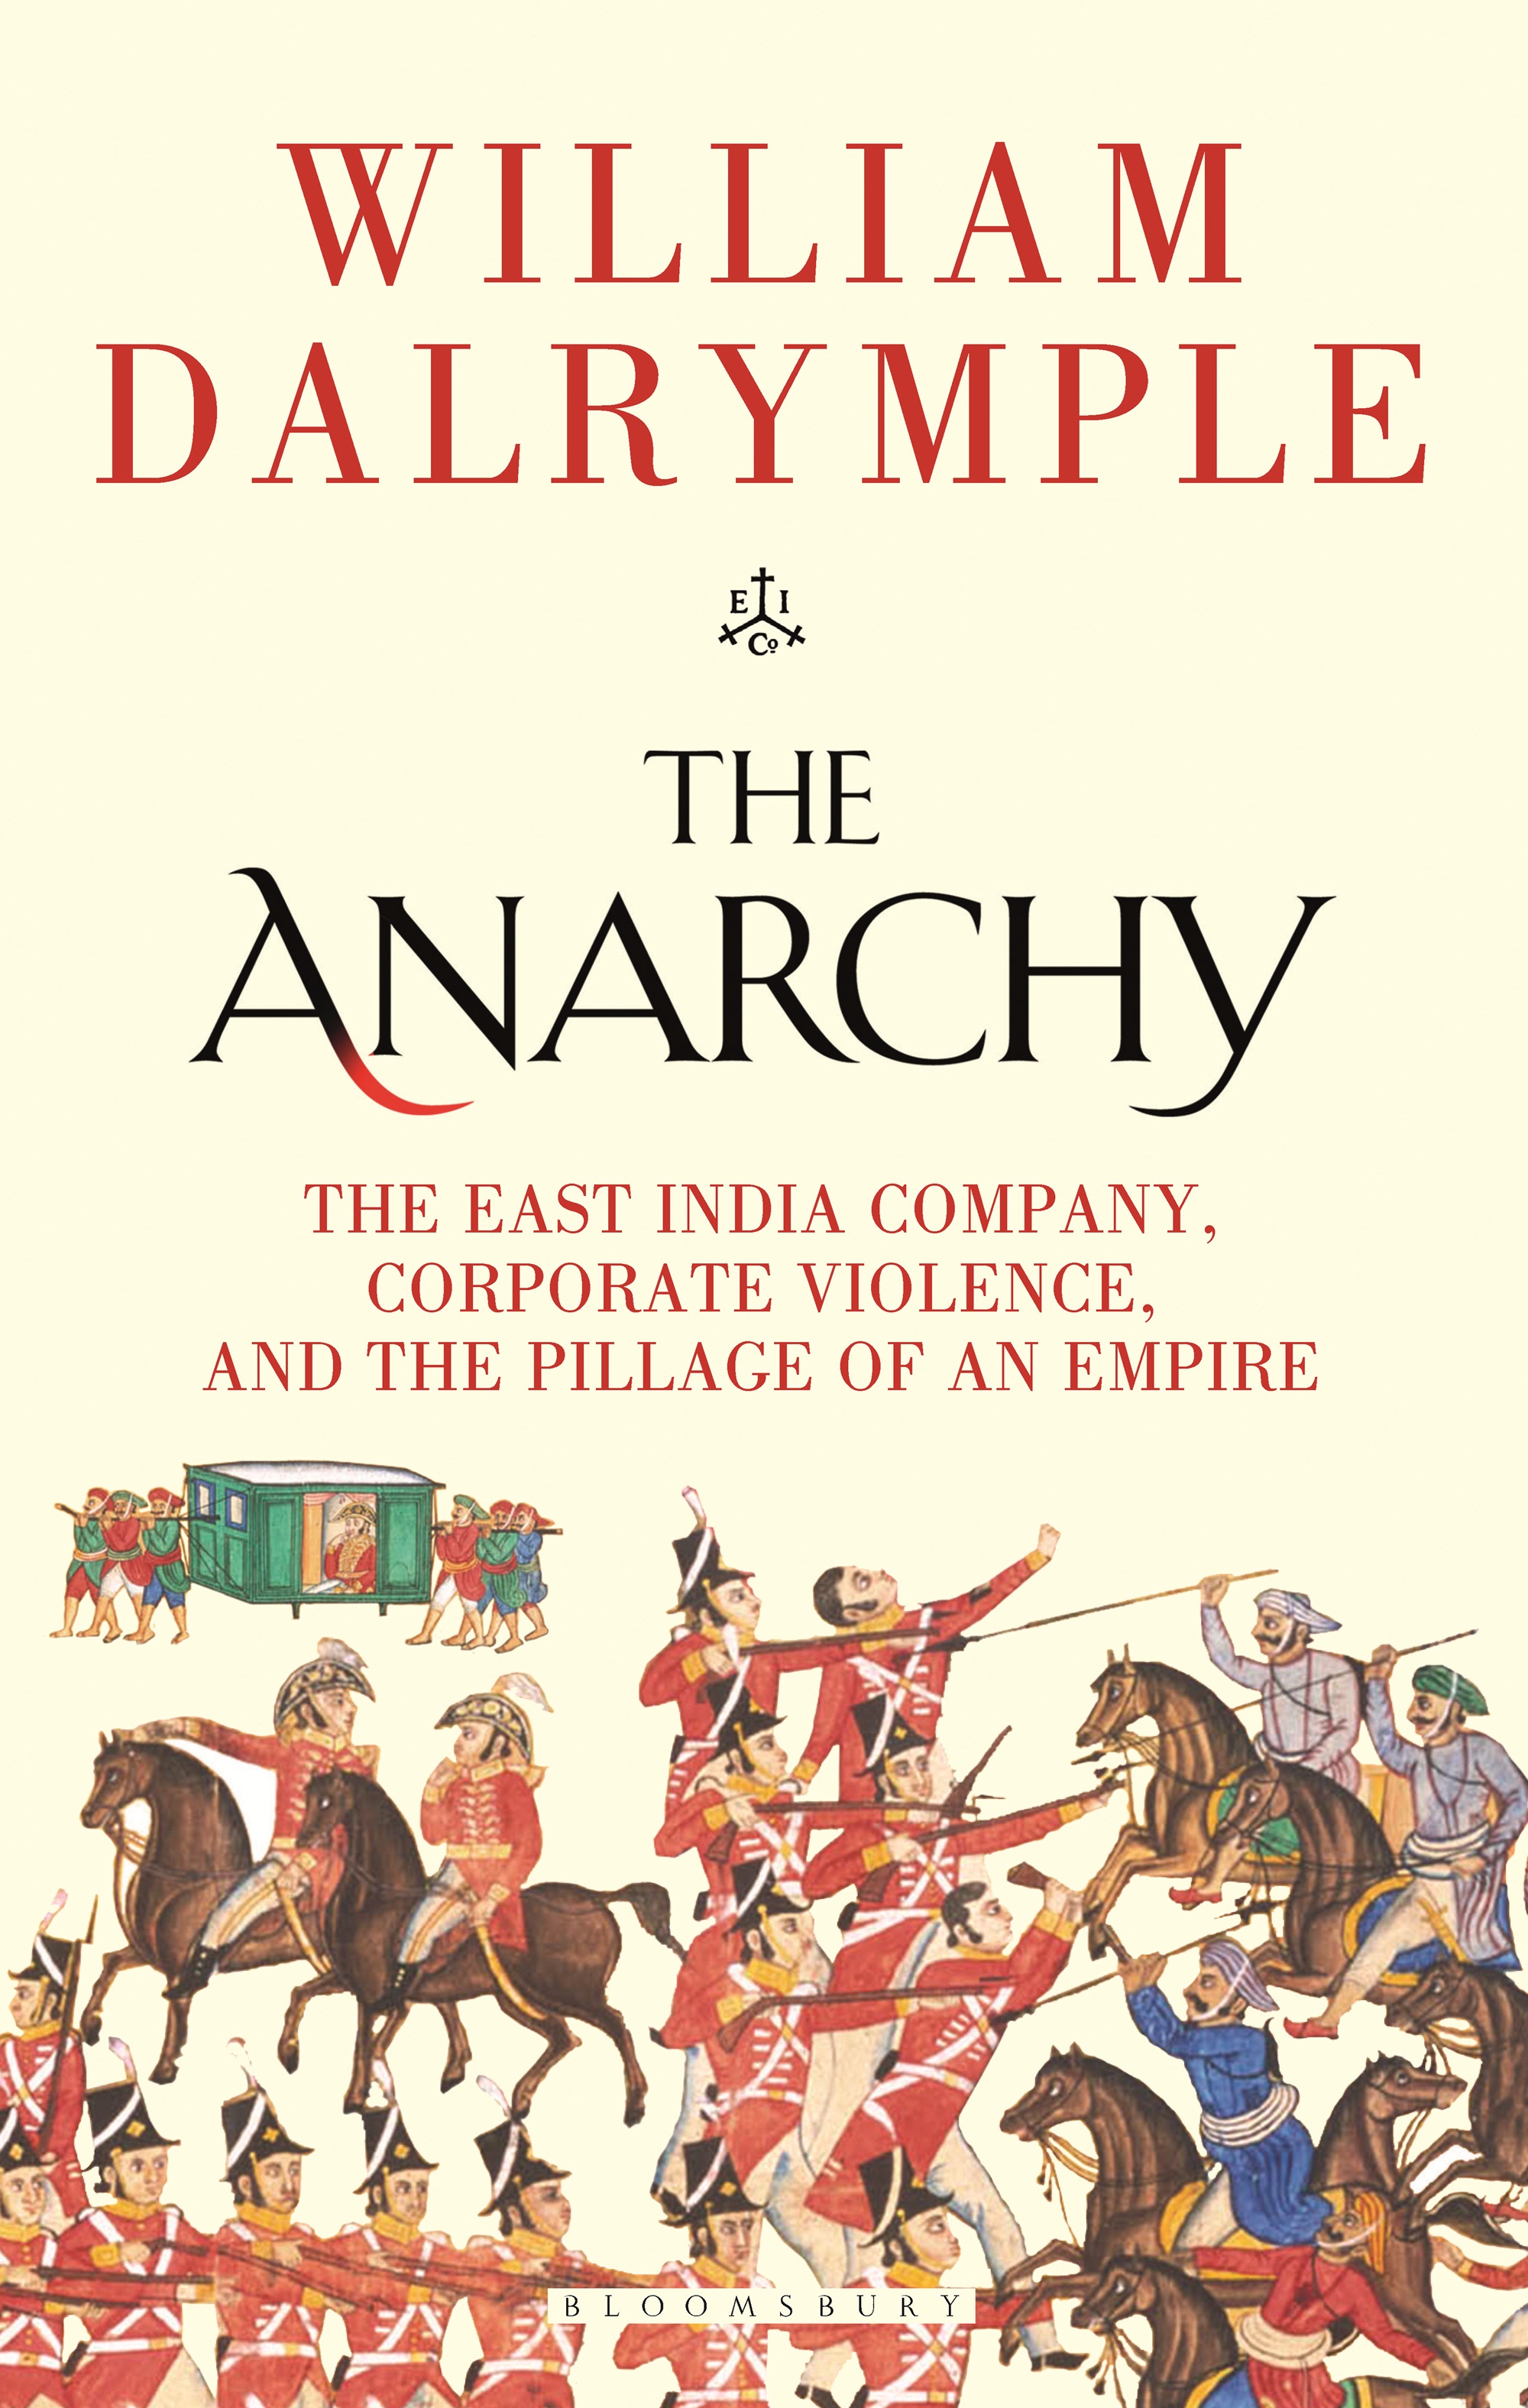 The Anarchy South Asia Cover (Source - Bloomsbury)